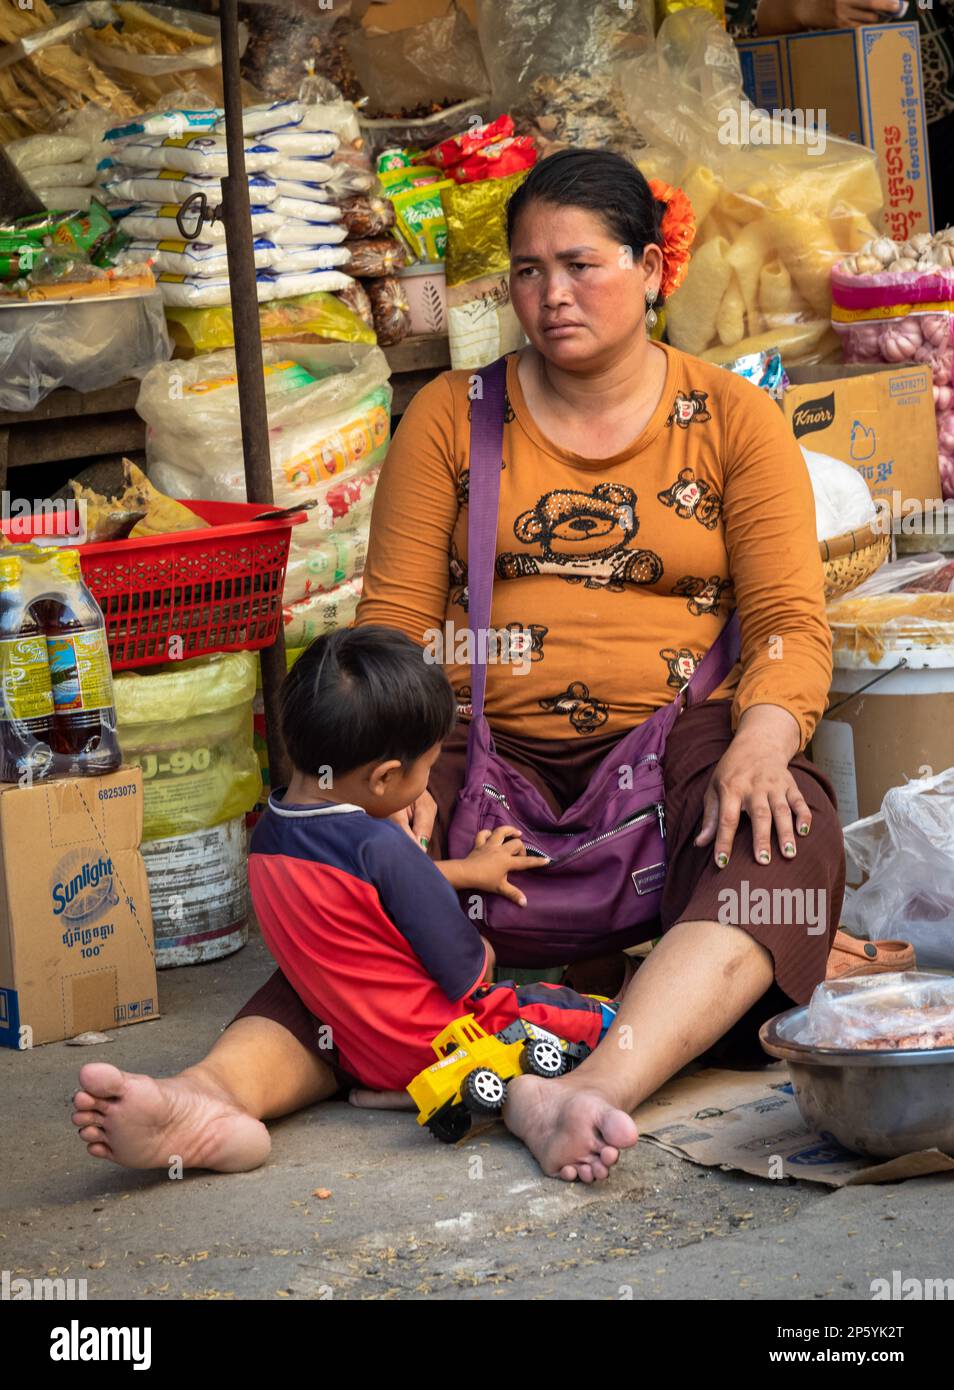 A female grocery stall holder in a street market in Phnom Penh, Cambodia, sits with her son by her feet and looks sad. Stock Photo